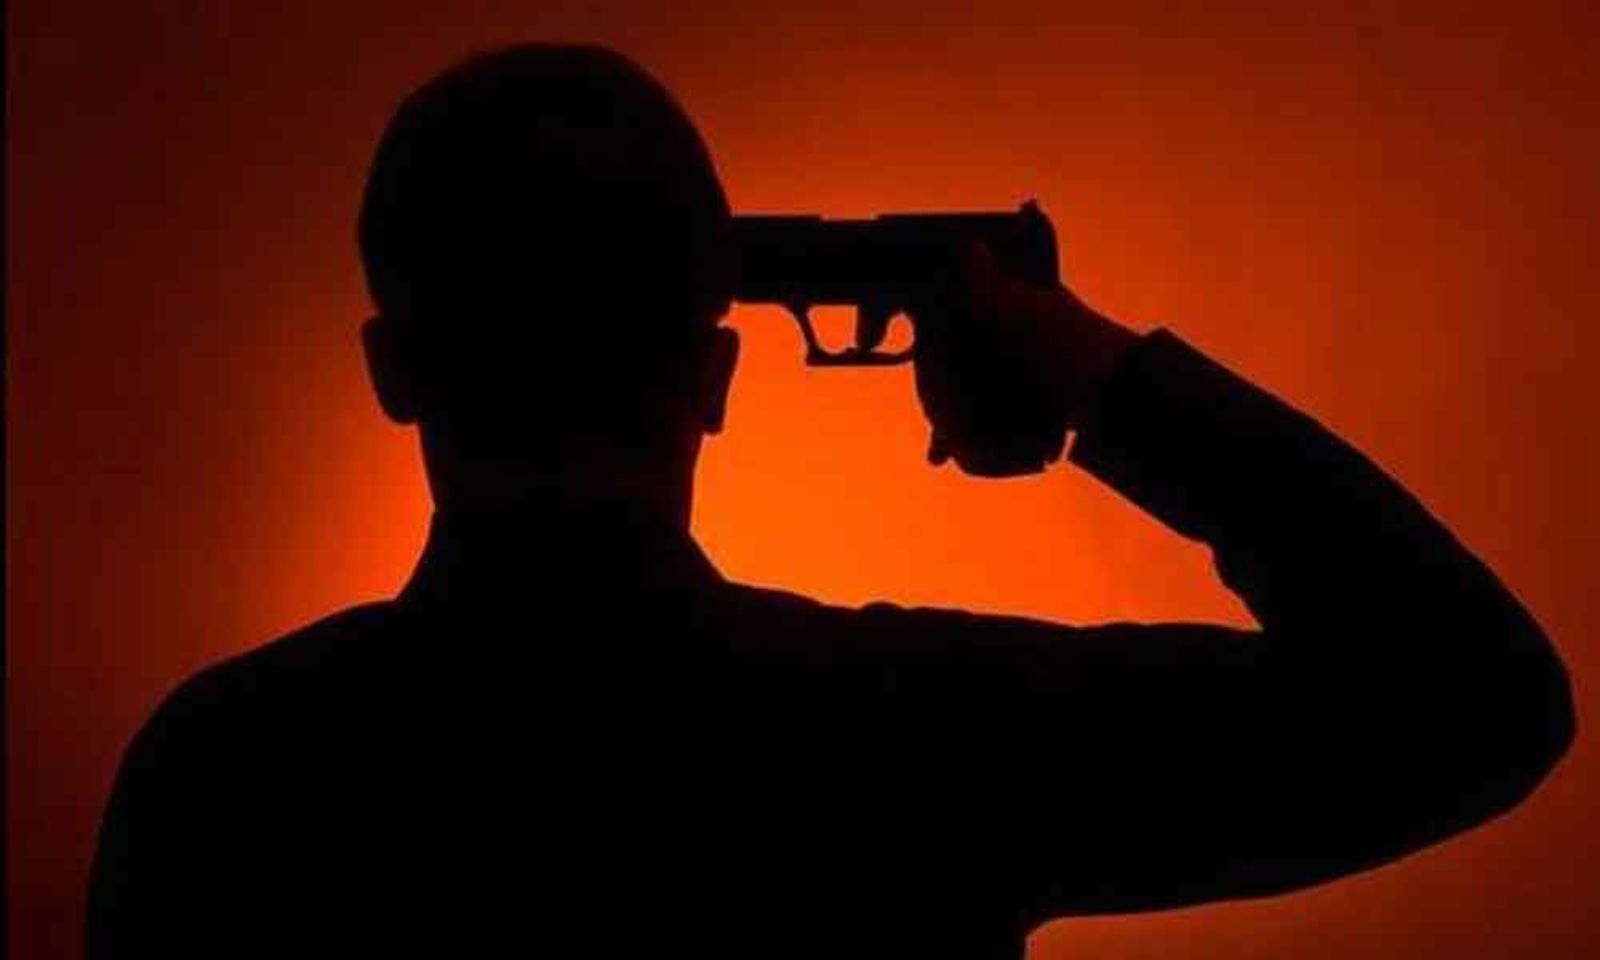 city-spf-constable-shoots-self-dies-in-visakhapatnam